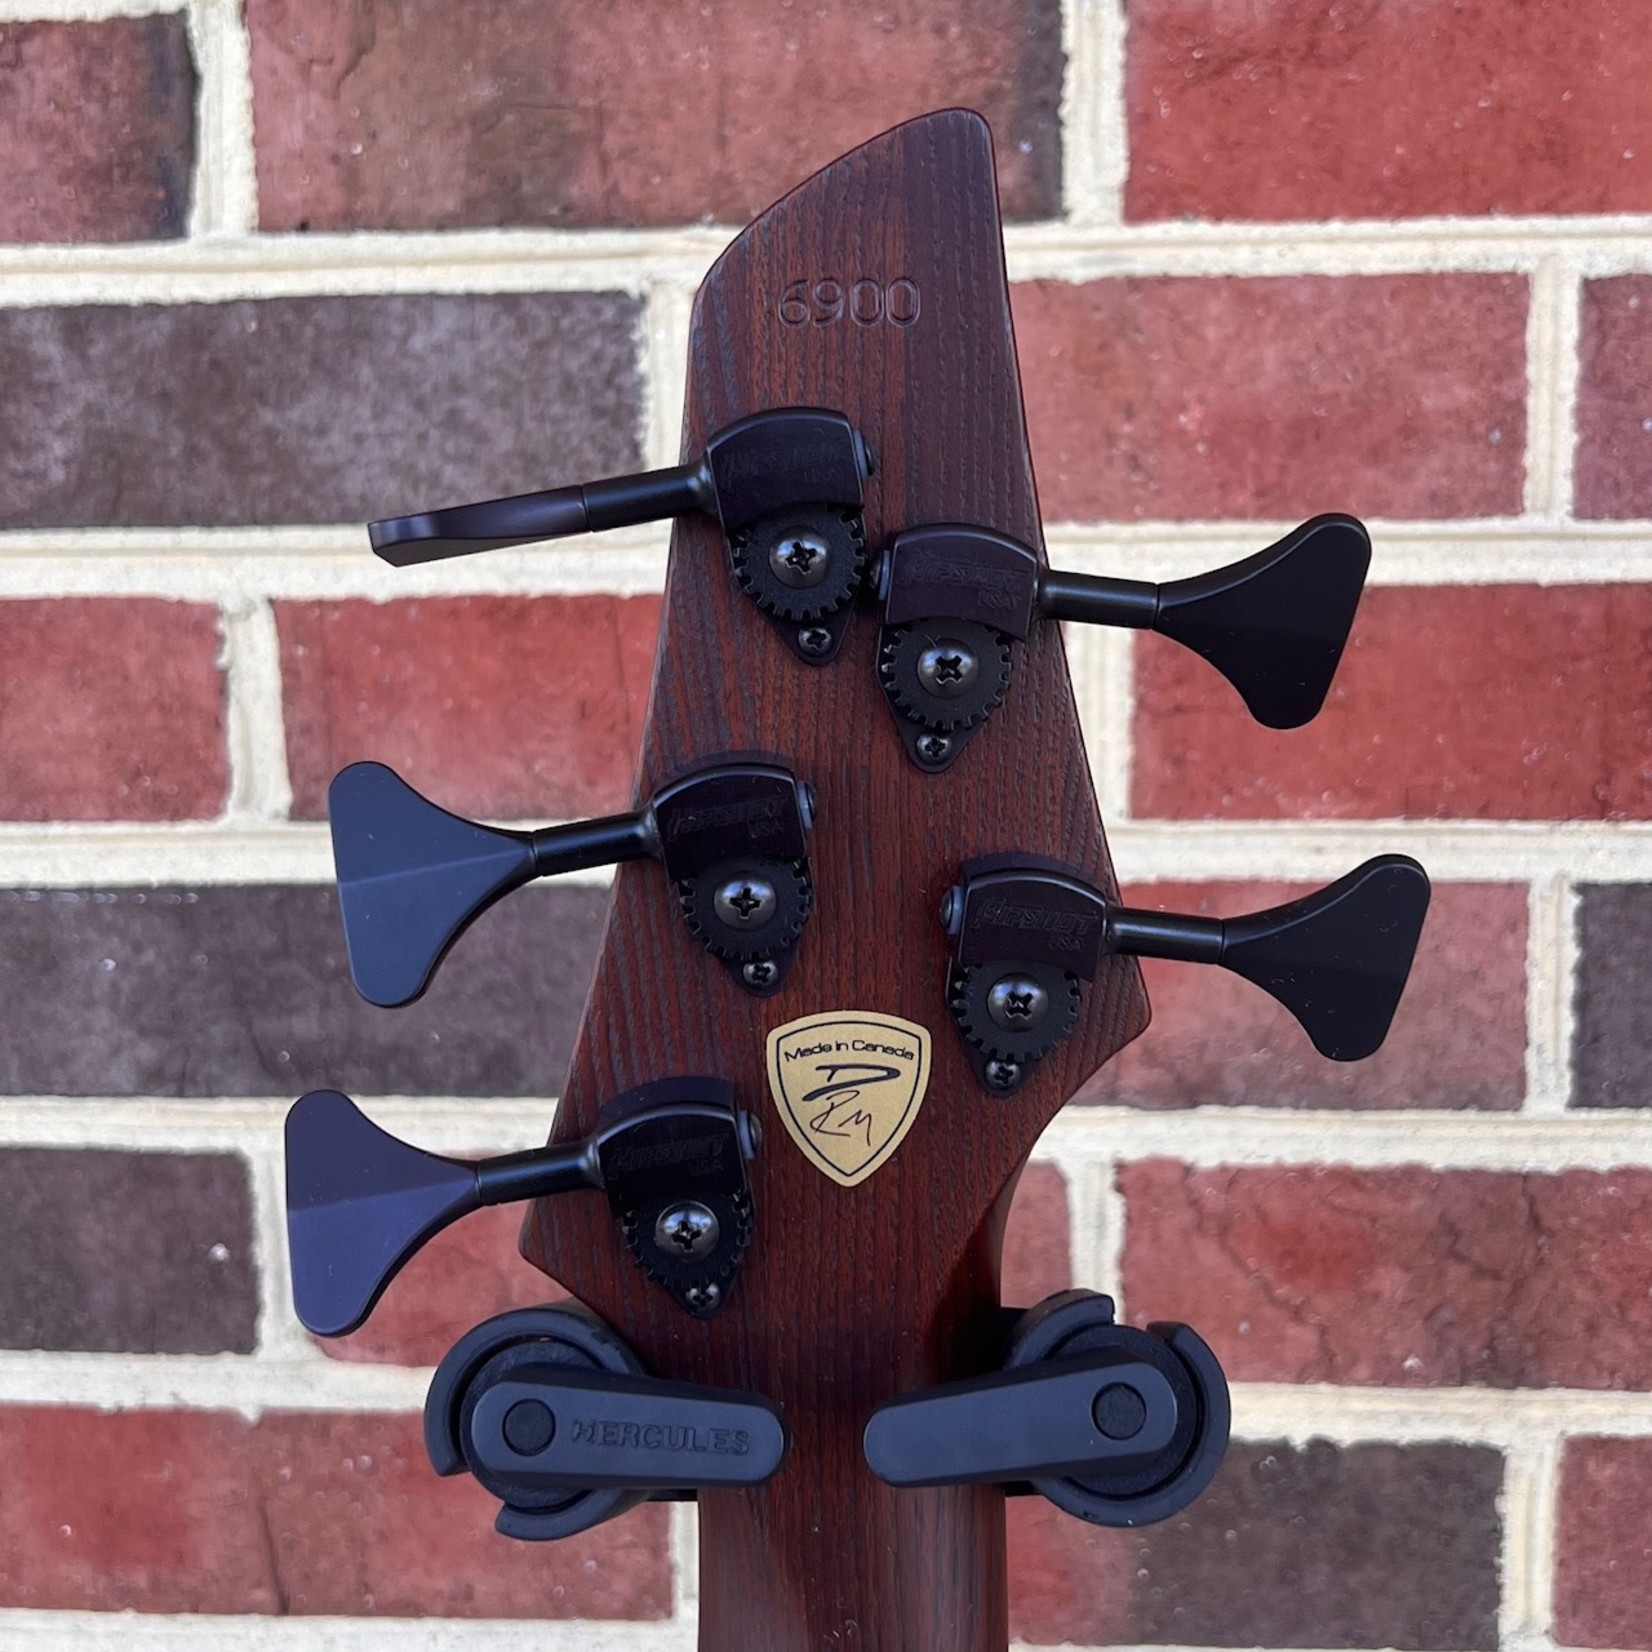 Dingwall Dingwall NAMM 2022 Ltd Ed. Cello Hip Z, 3x Pickups, Wenge X-Top, Dual Density Swamp Ash Body, Roasted Ash Neck, Wenge Fretboard, Dots w/ 12th Fret D Inlay, Matching Headstock, Glockenklang Preamp w/ Toggles, Gig Bag, SN# 6900